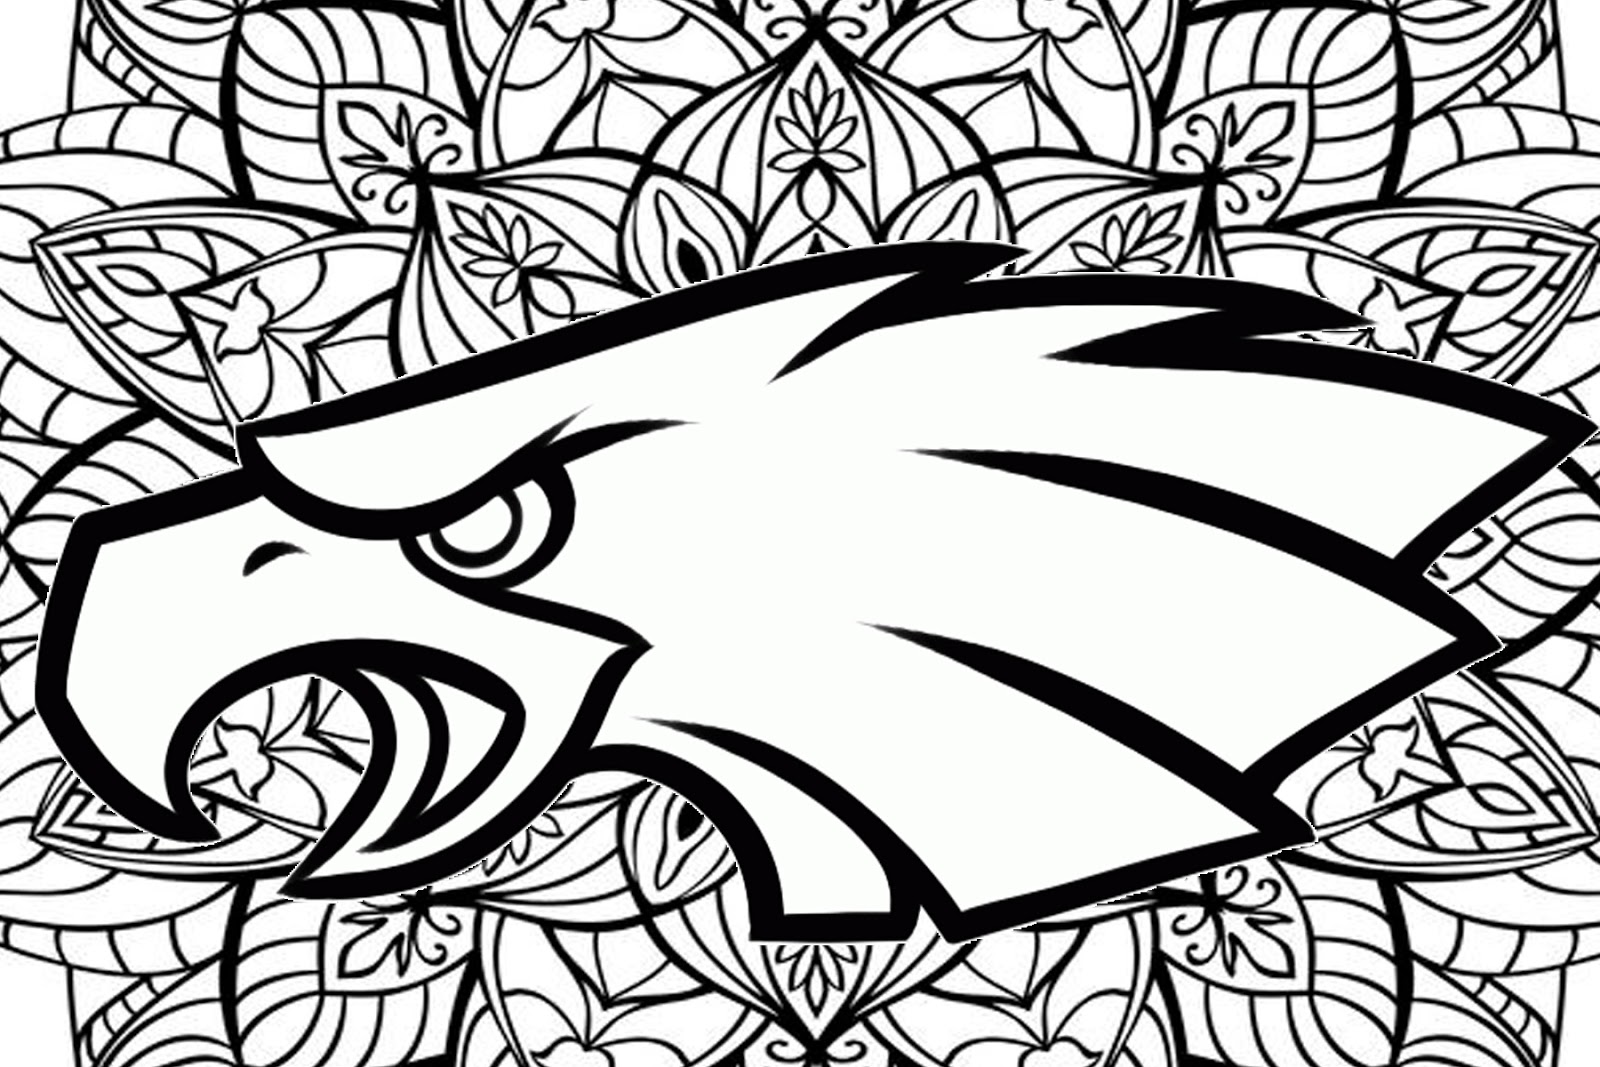 Philadelphia Eagles mandala coloring pages | Coloring Pages